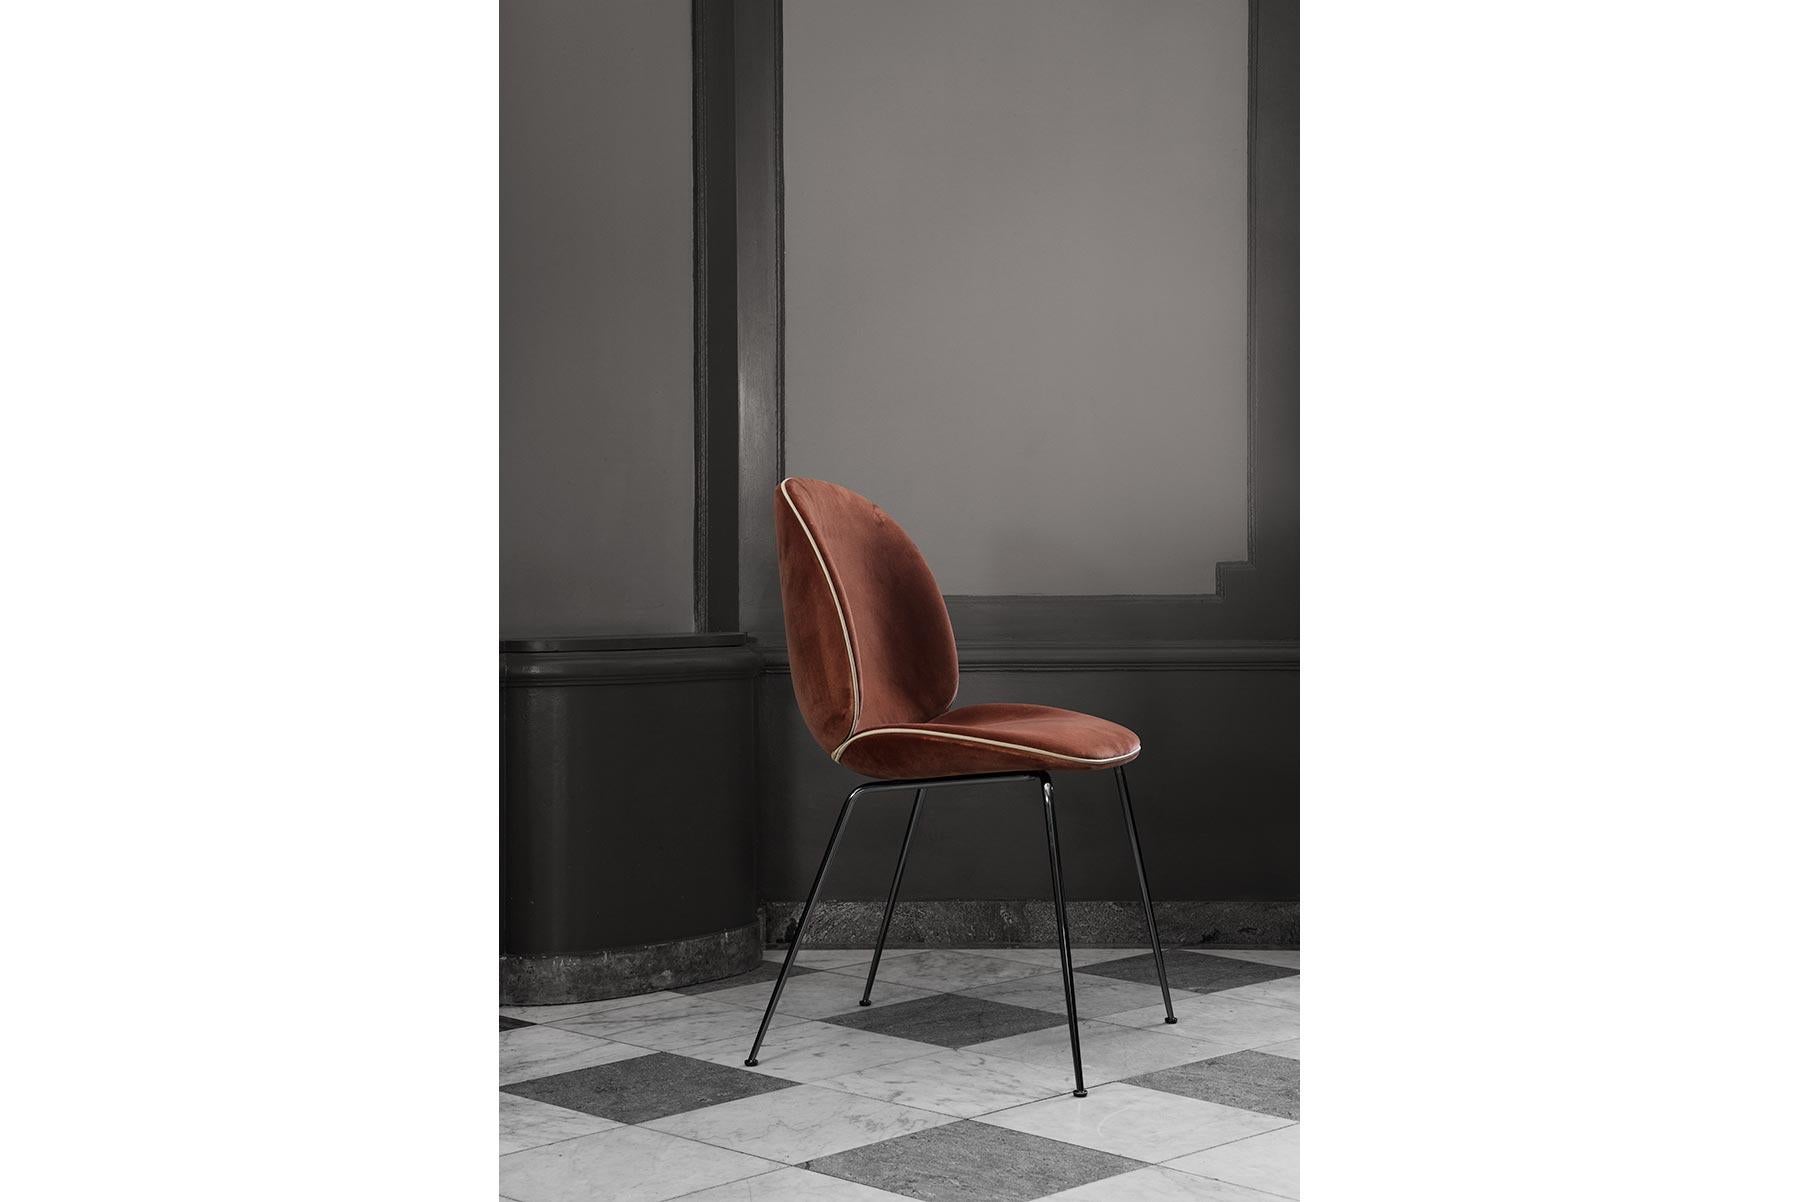 Beetle Dining Chair, Un-Upholstered, Conic Base, Chrome In New Condition For Sale In Berkeley, CA